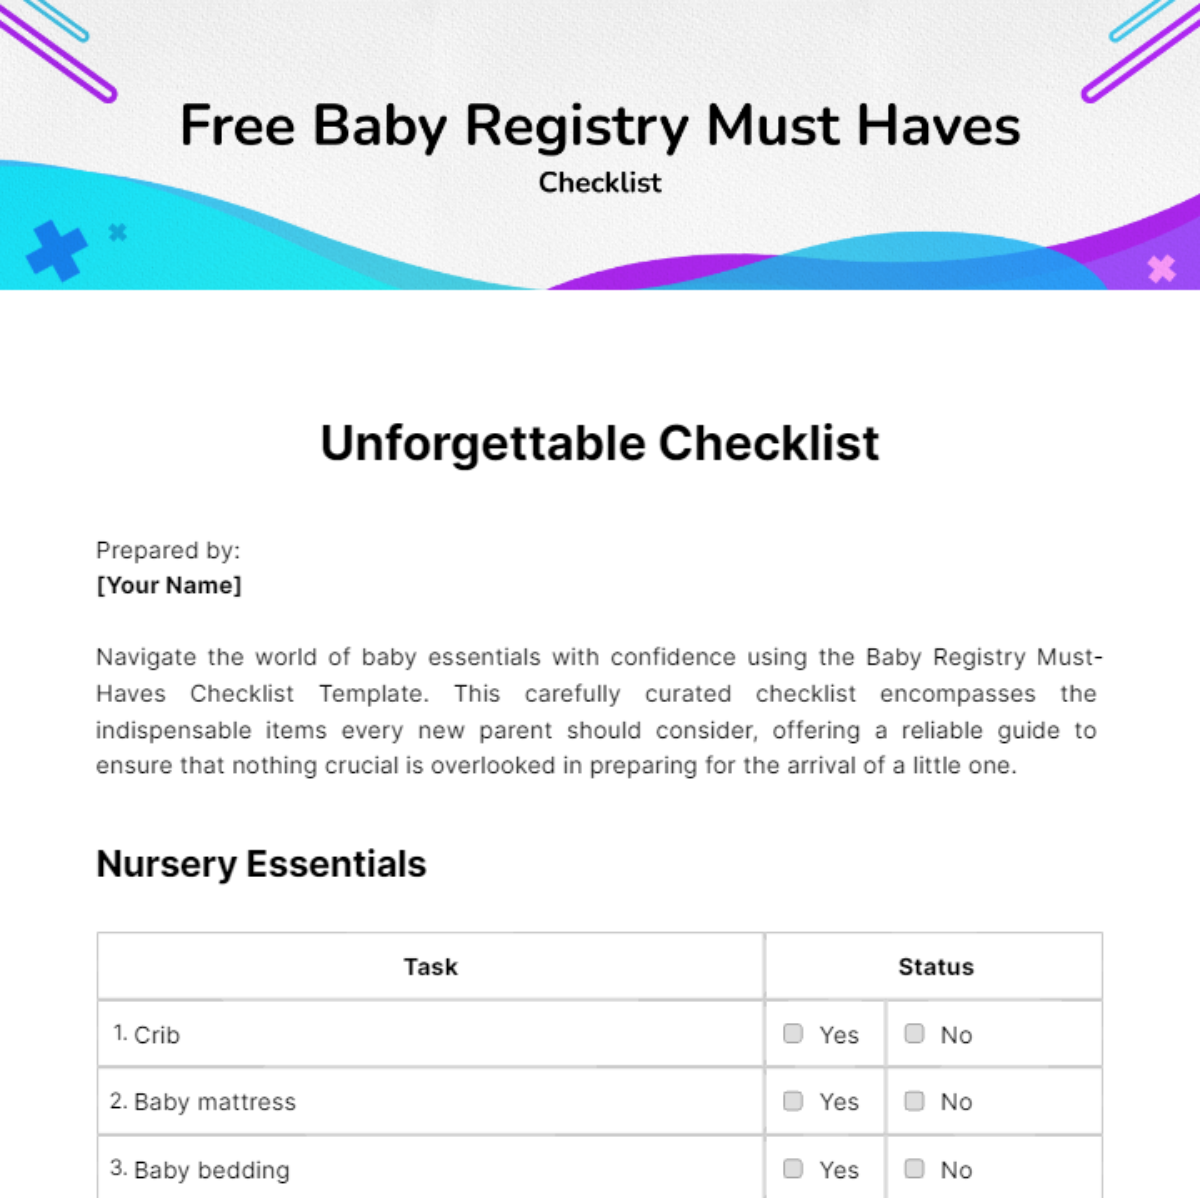 Free Baby Registry Must Haves Checklist Template